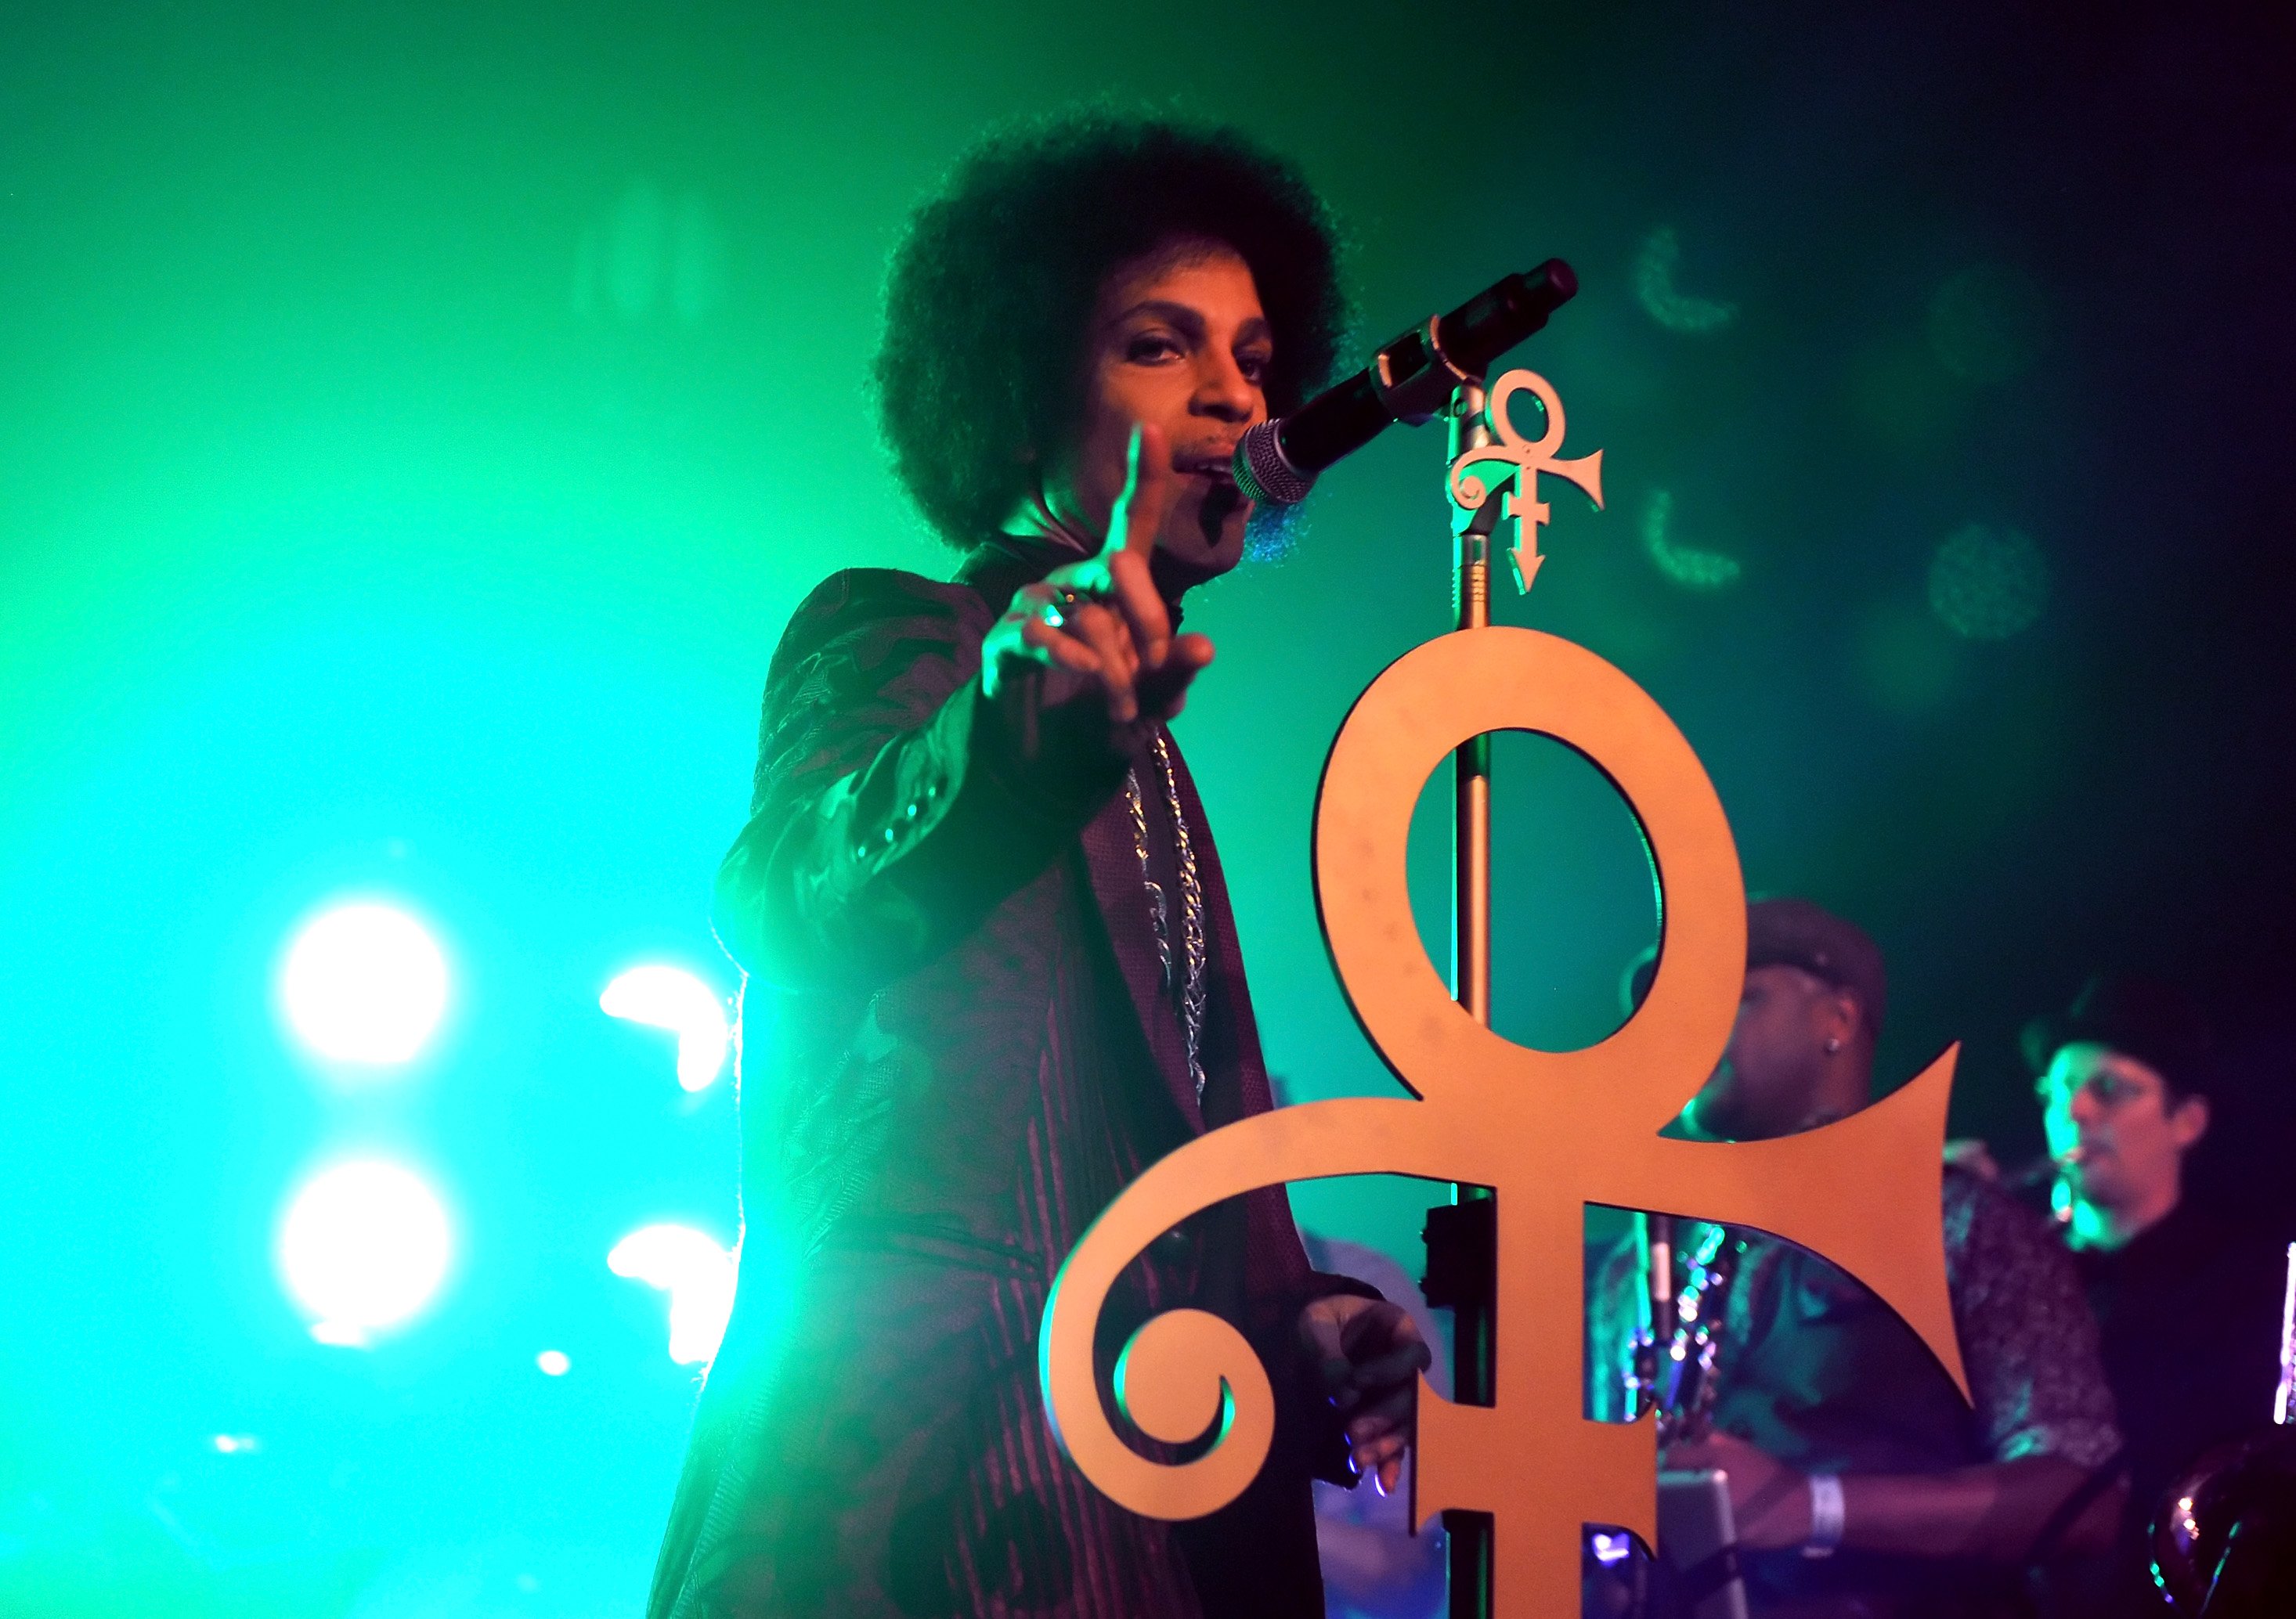 Prince singing onstage at The Hollywood Palladium in 2014